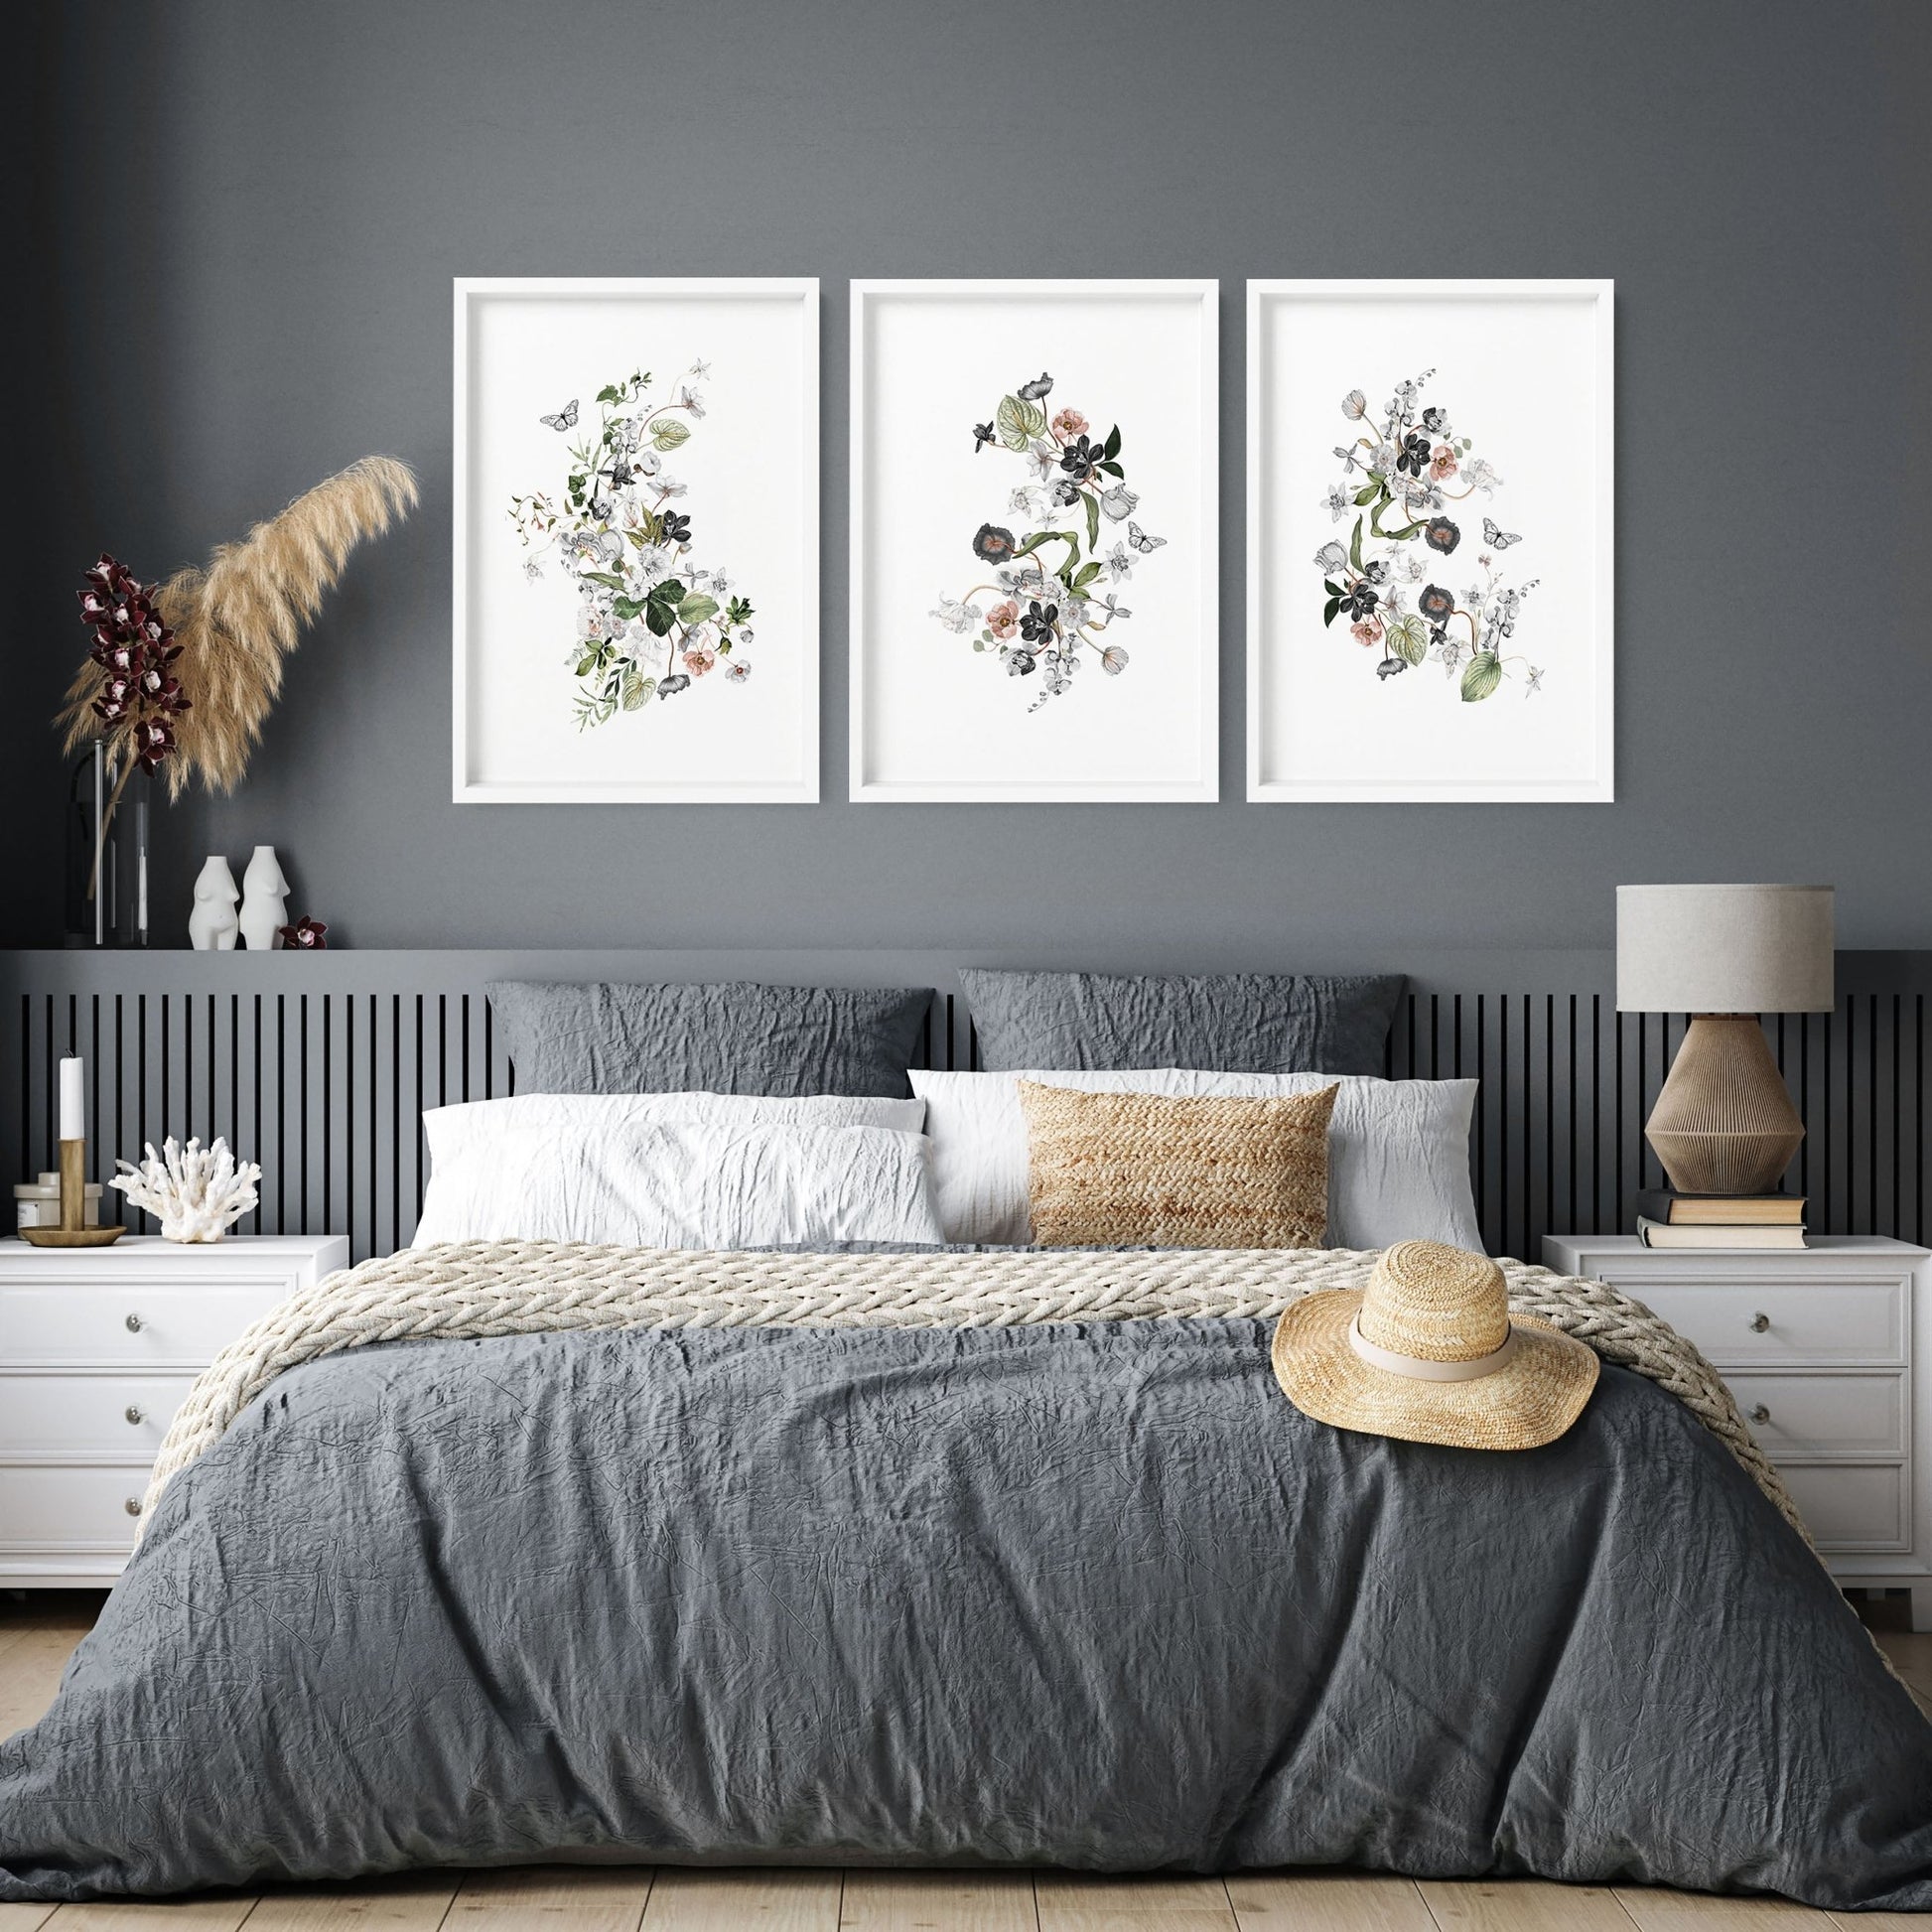 Wall art for a bedroom | set of 3 prints - About Wall Art